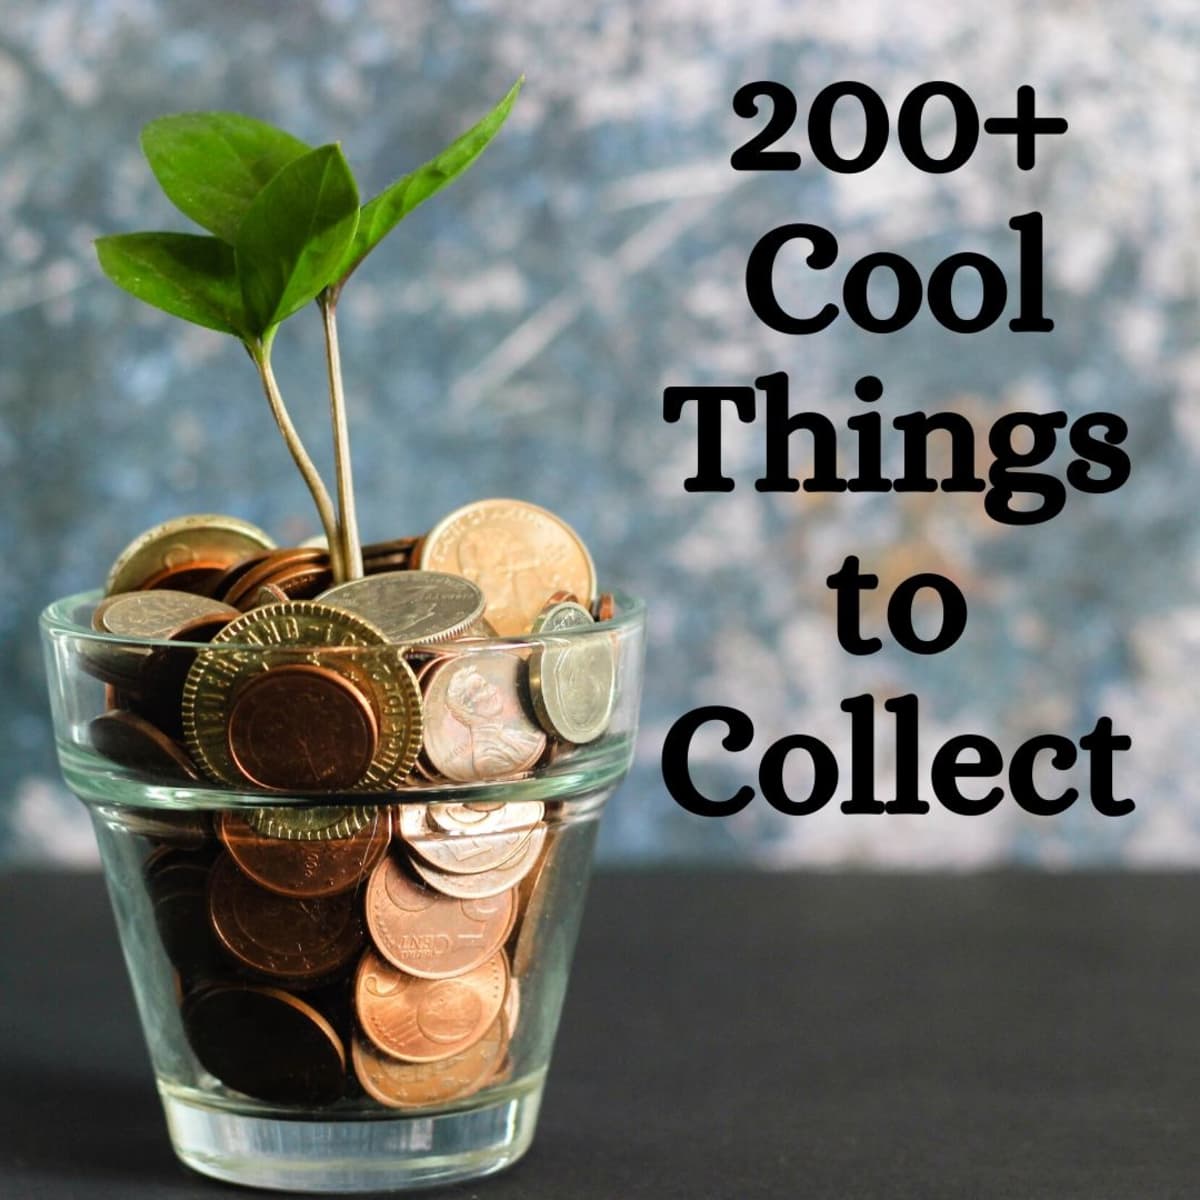 Do you collect things. Cool things. Things to collect. Things for collection. Collect Coins 4 класс.